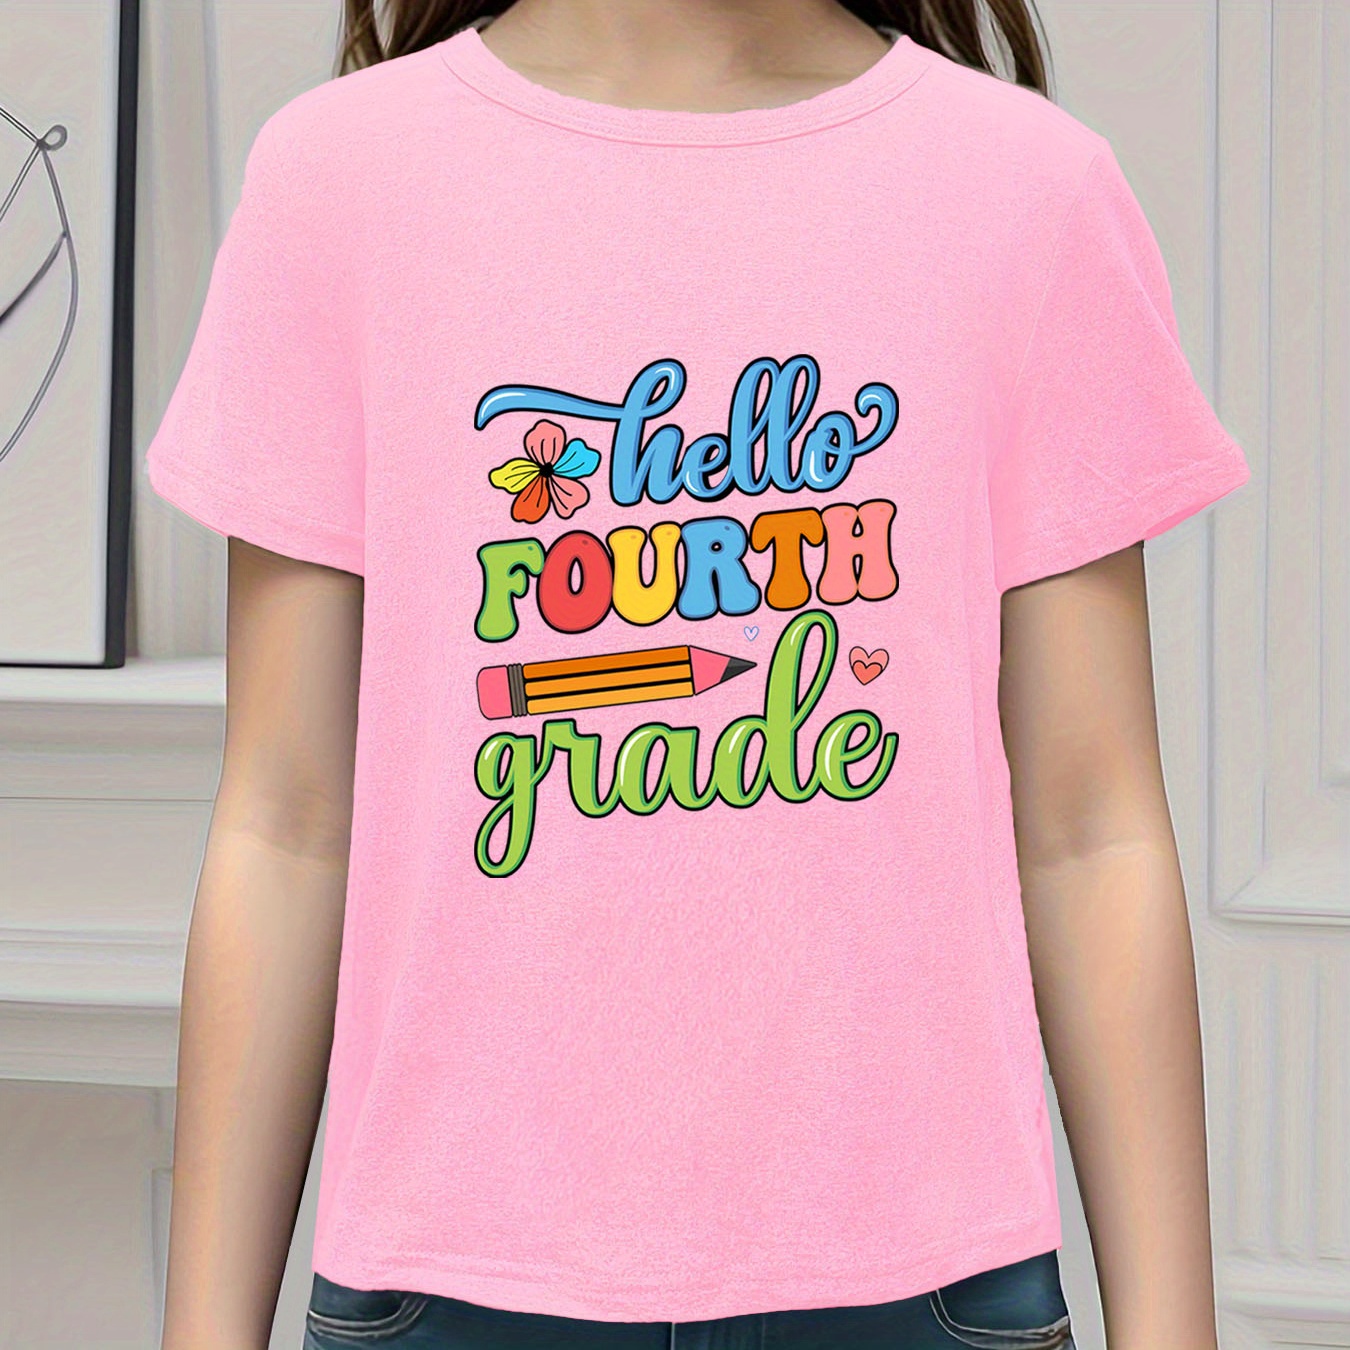 

Girls Summer Casual Fashion Cartoon Pencil Flower & Hello Fourth Grade Printed T-shirt Top, Short Sleeves, Round Neck, Comfort Fit - Youthful Style